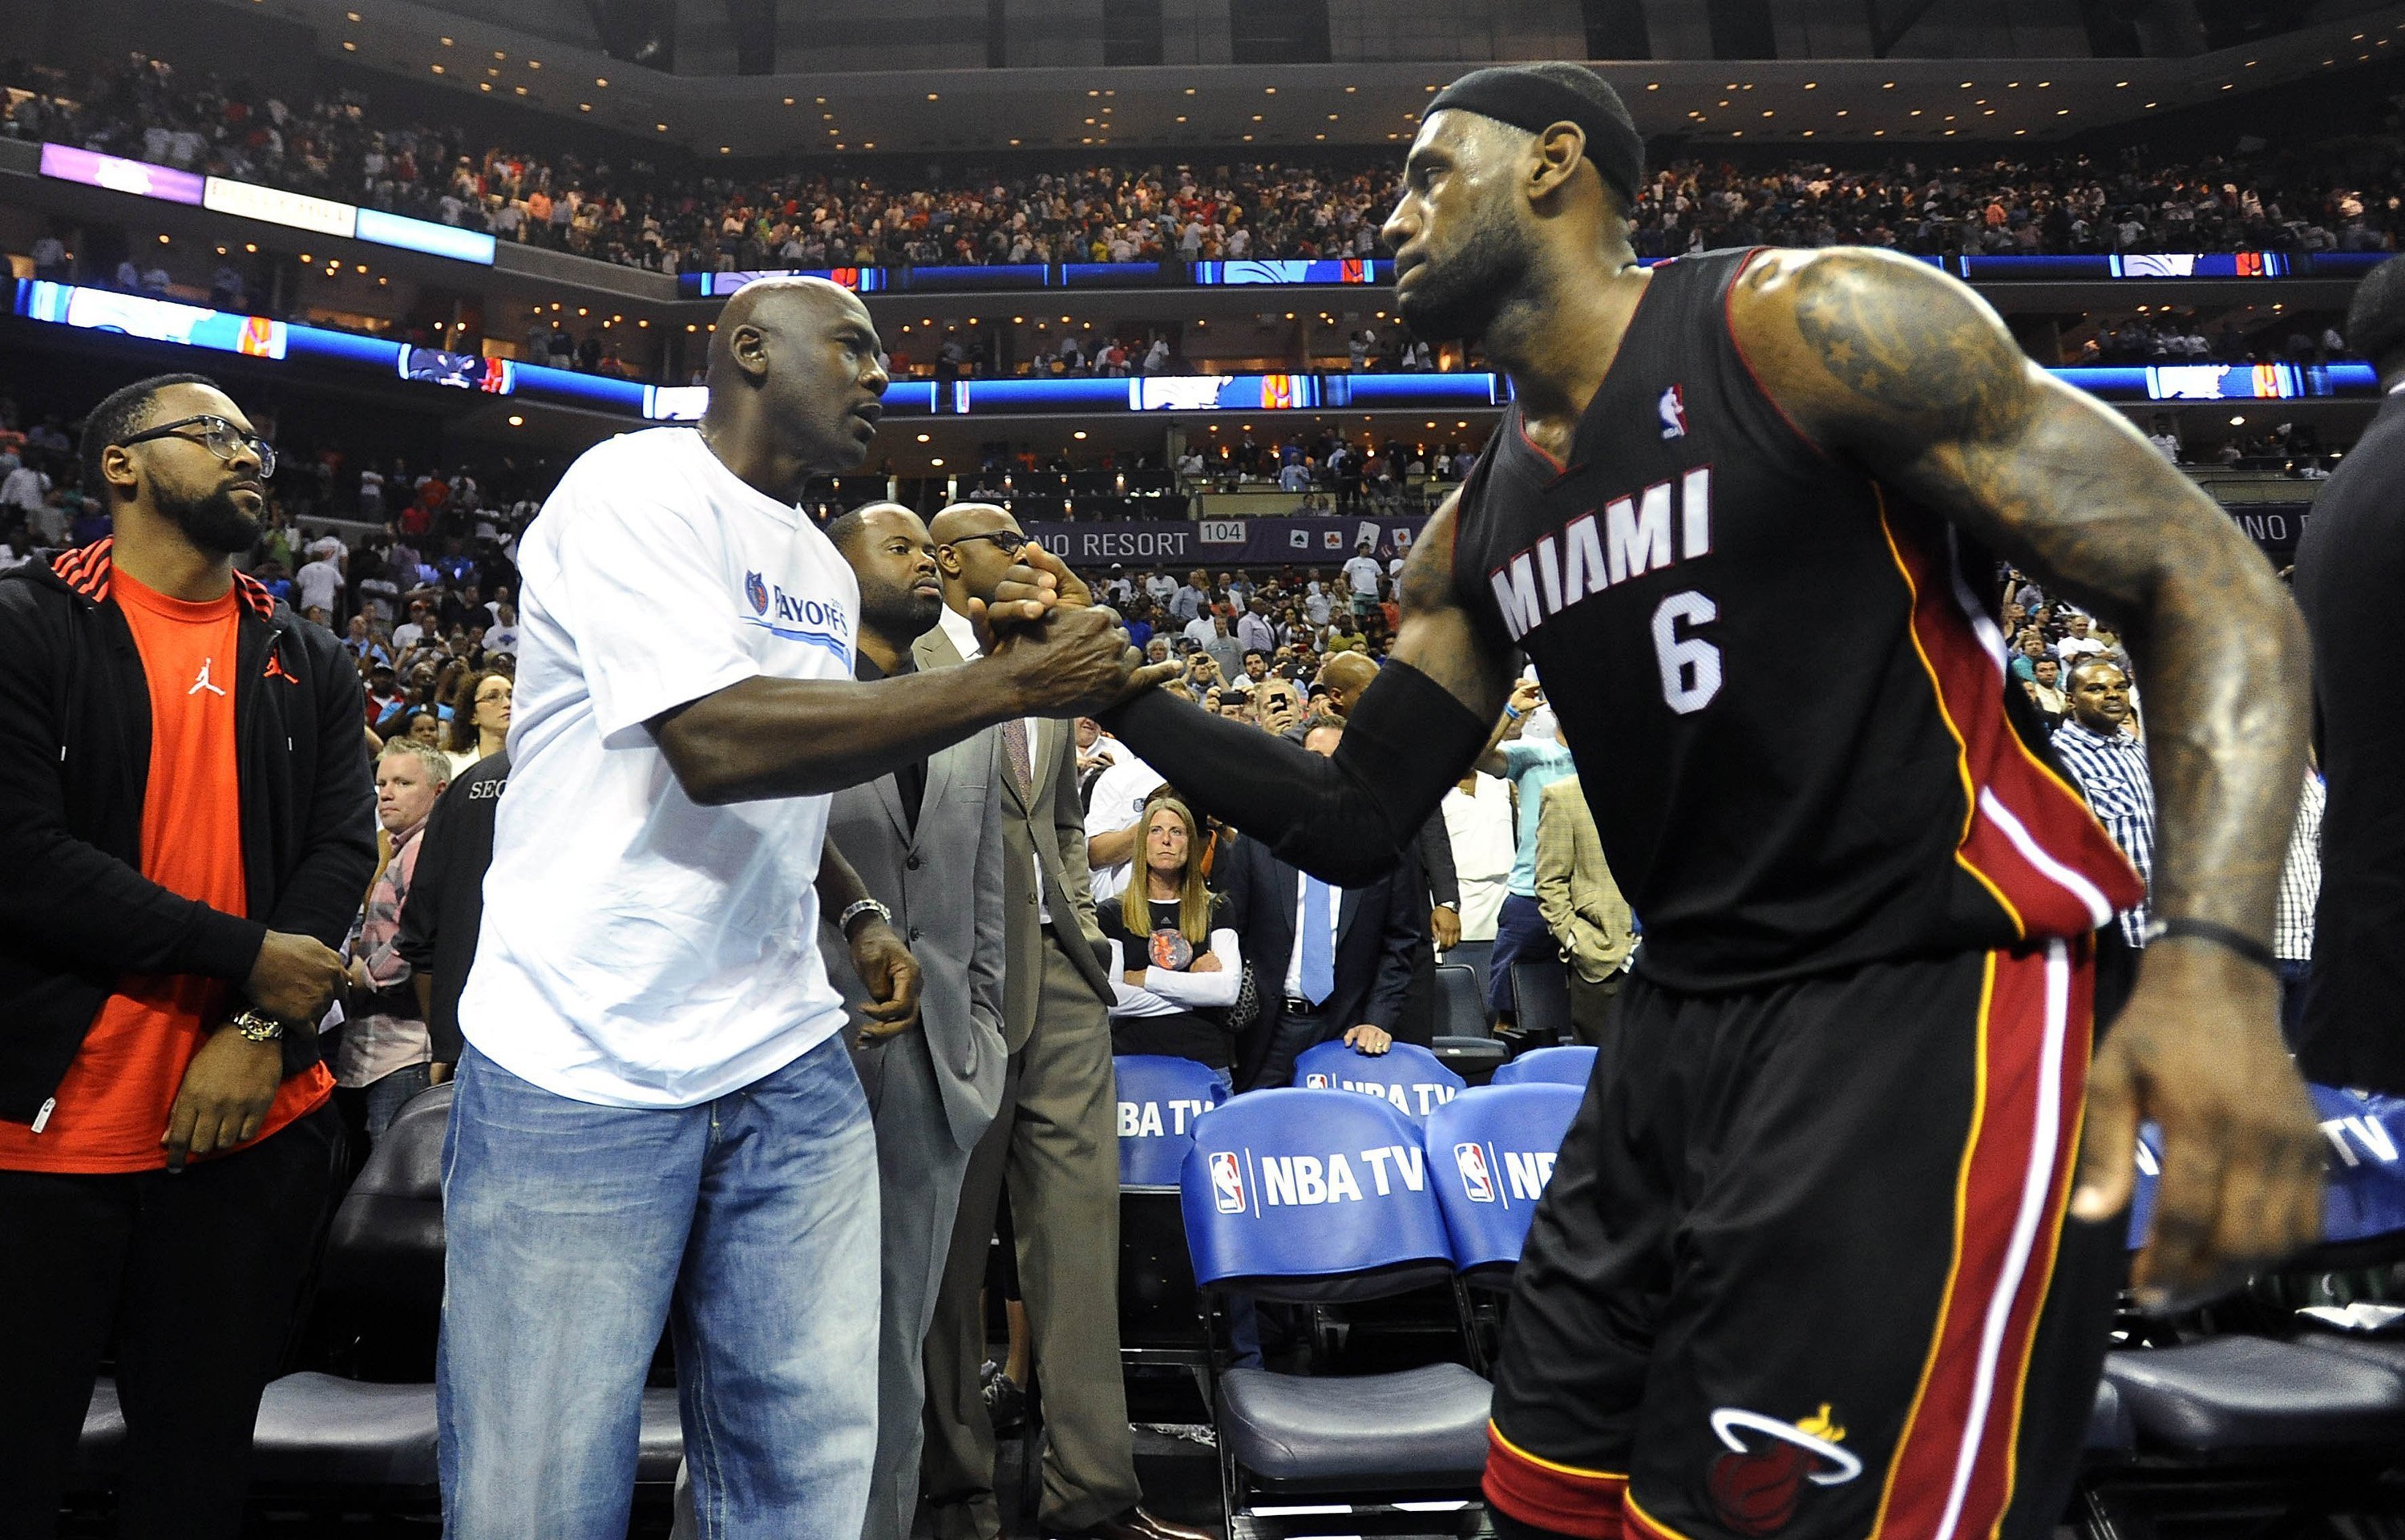 Charlotte Bobcats' team owner Michael Jordan shakes hands with Miami Heat forward LeBron James (6), after the Heat defeated the Bobcats, 109-98, in Game 4 of the NBA Eastern Conference quarterfinals at Time Warner Cable Arena in Charlotte, N.C., Monday, April 28, 2014. (Charlotte Observer—Getty Images)